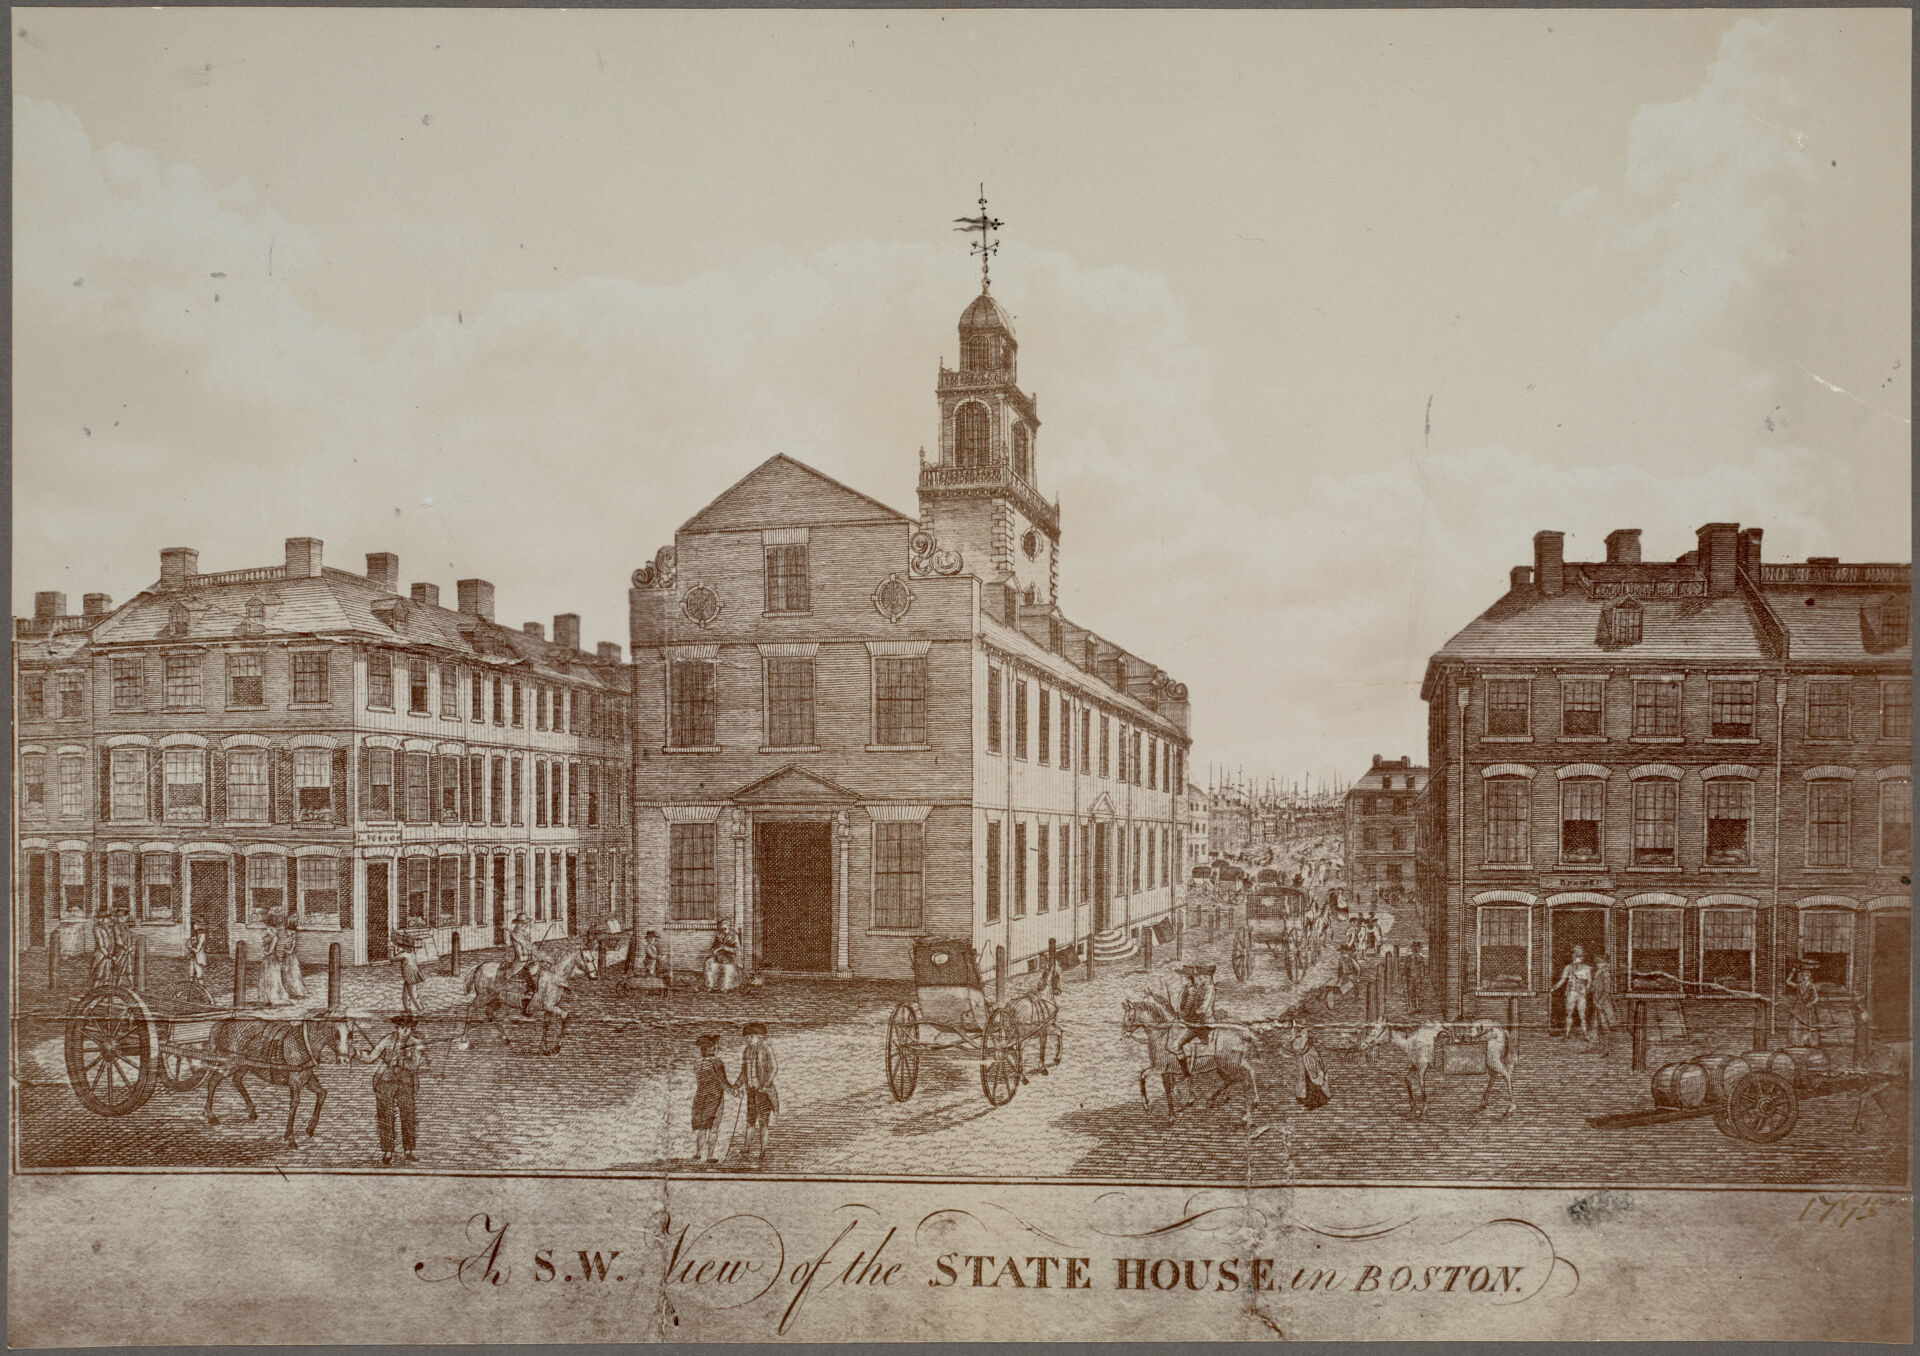 A s.w. view of the State House in Boston, drawing of state house and populated streets.